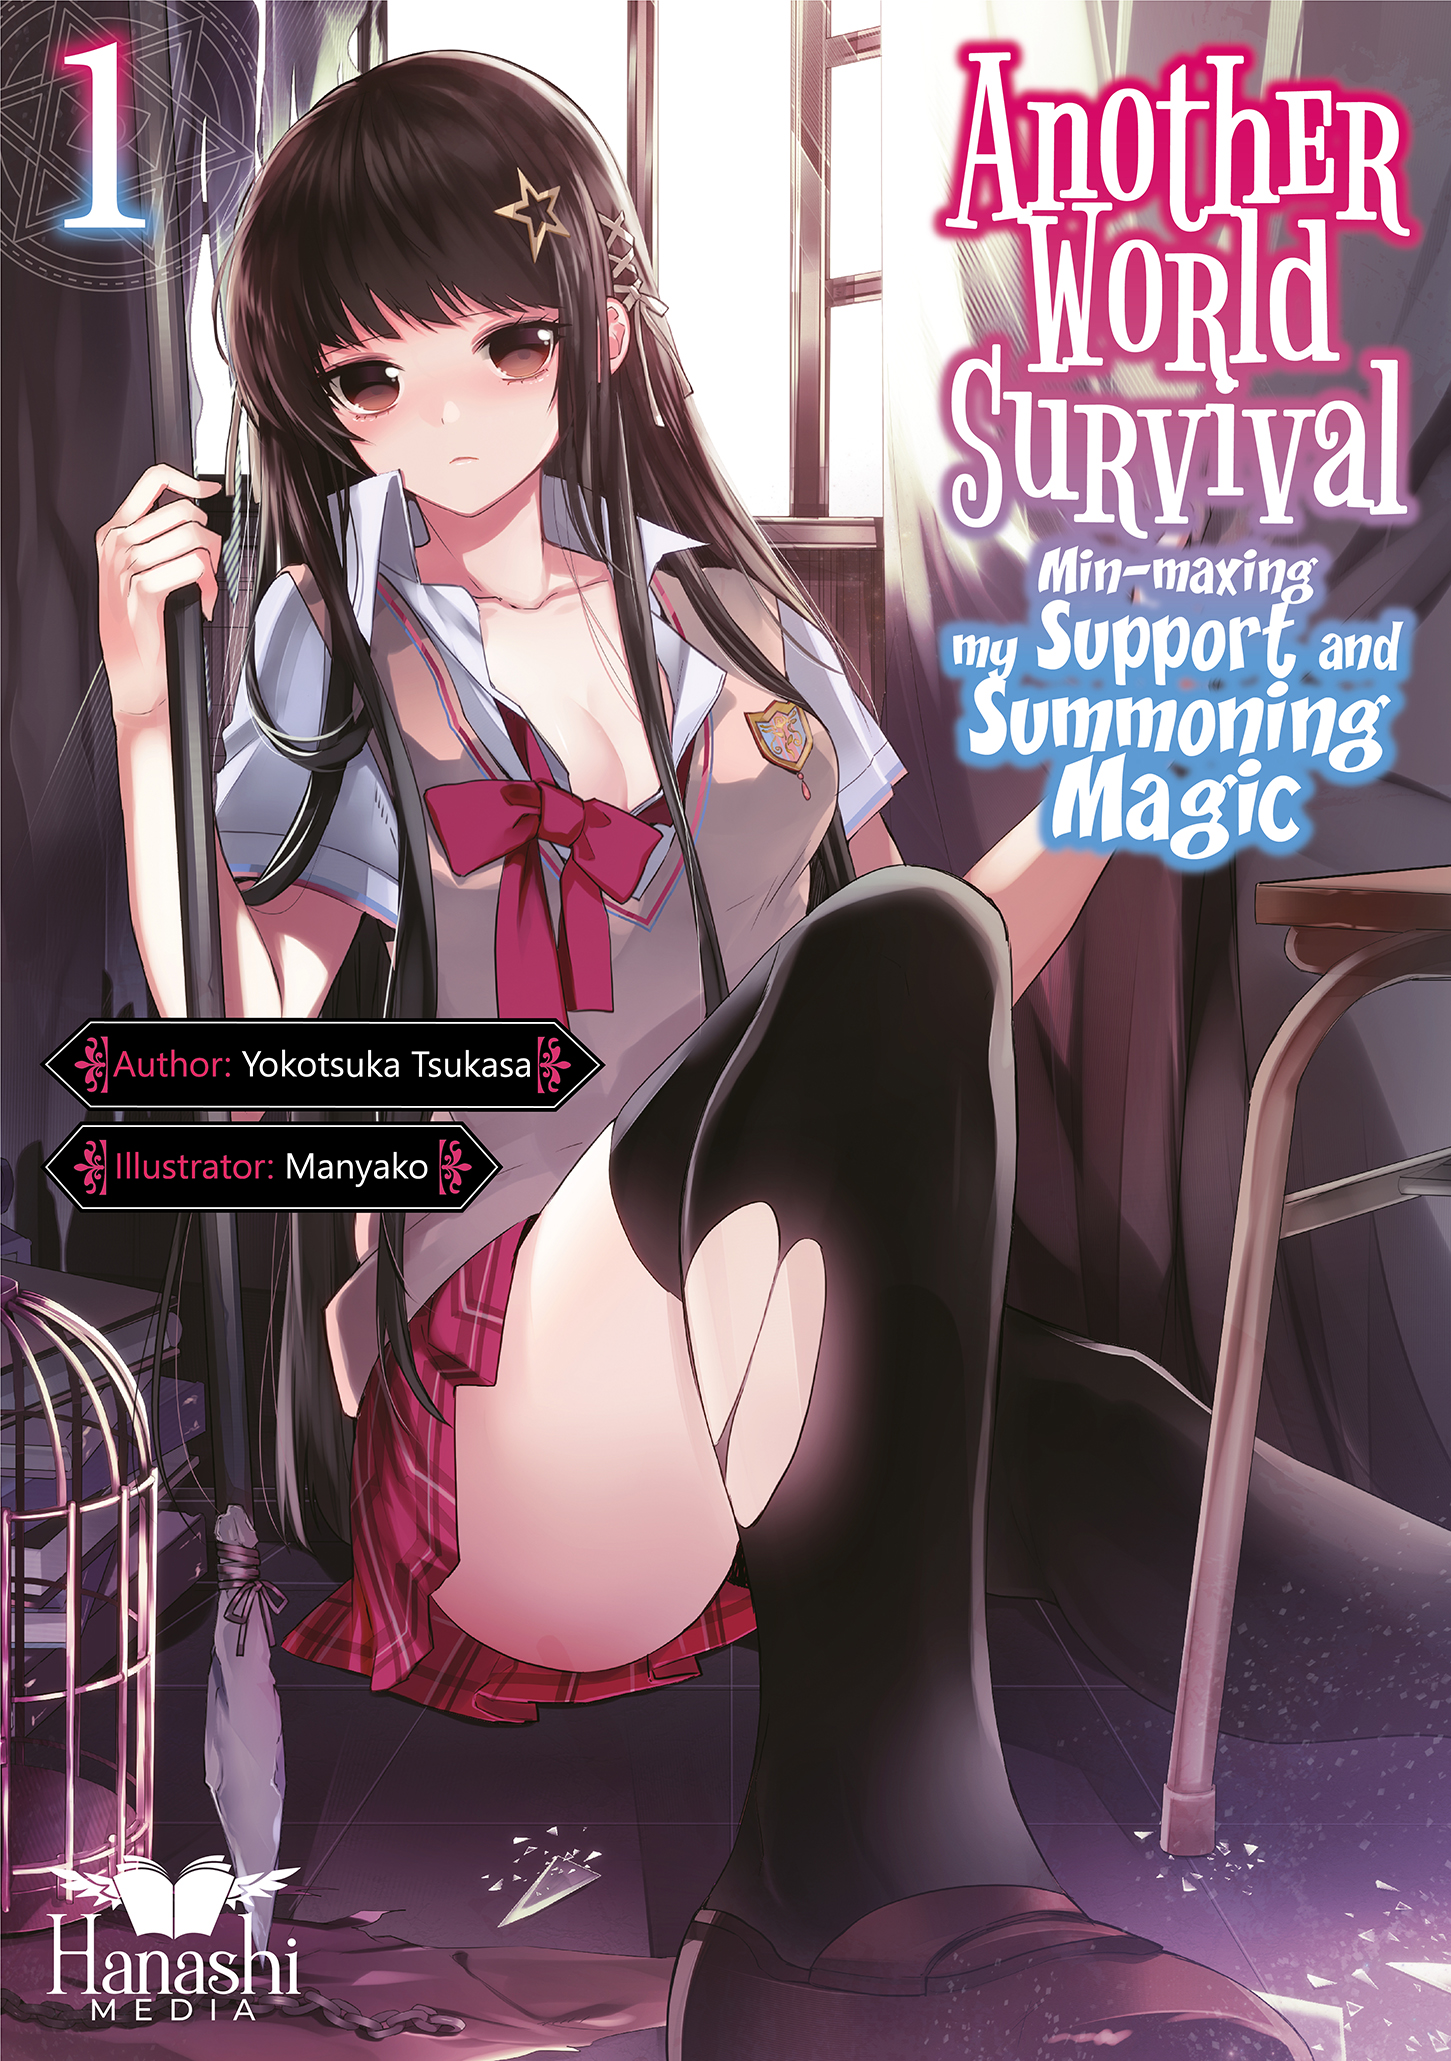 In Another World With My Smartphone Light Novels Get Anime